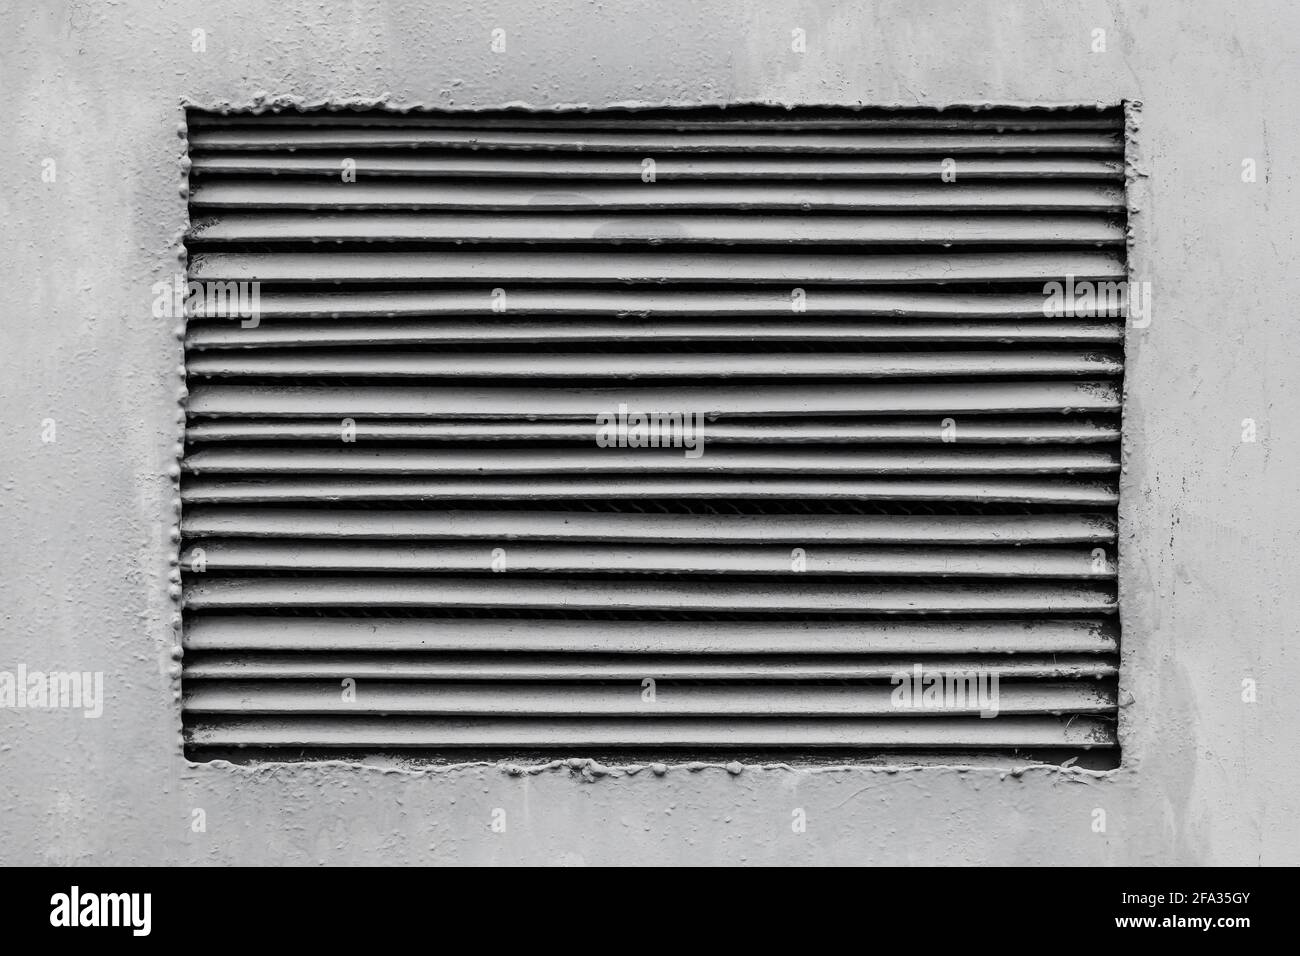 Close-up wall ventilation grille with pull cord air flow control, hand  closes the shutter using a cord Stock Photo - Alamy